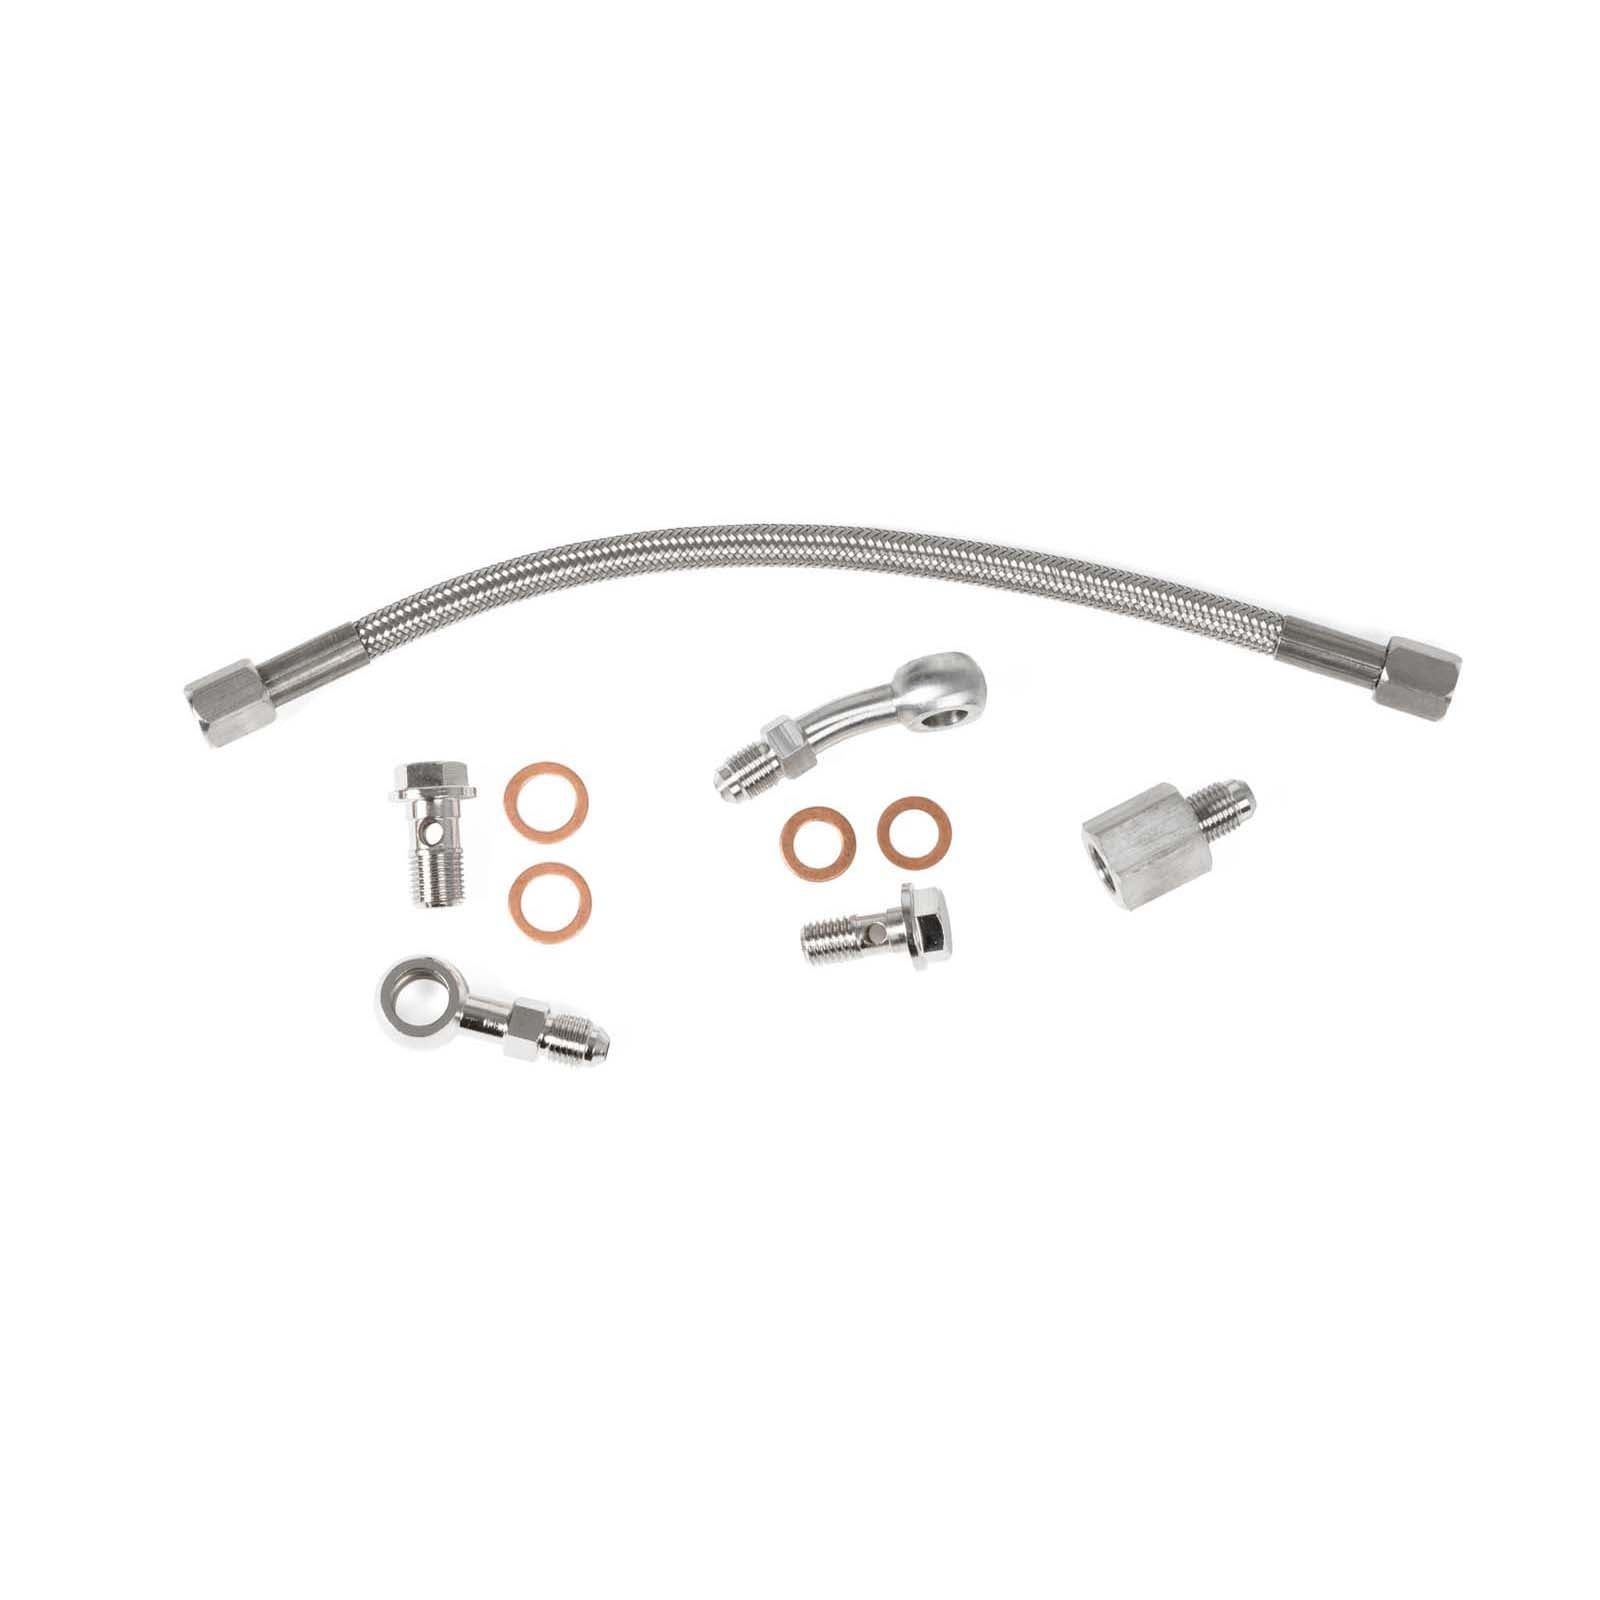 GrimmSpeed Turbocharger Oil Feed Line Kit